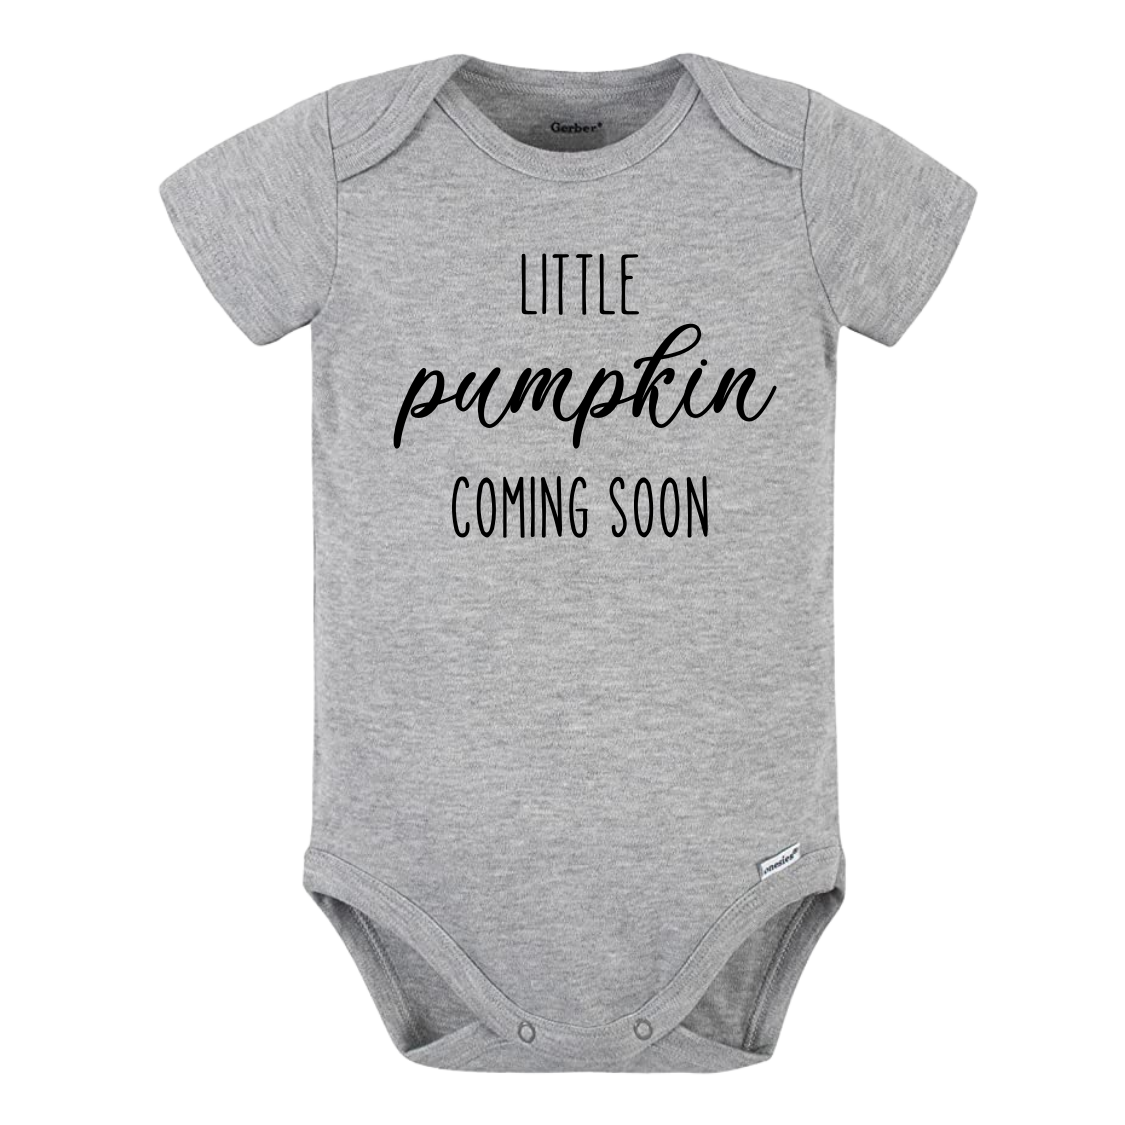 baby girl onesies funny baby onesies baby announcement onesie personalized baby girl gifts custom baby onesie infant clothes cute baby girl clothes funny baby clothes newborn onesies unisex newborn boy onesies funny onesies for babies baby essentials baby boy clothes newborn essentials must haves